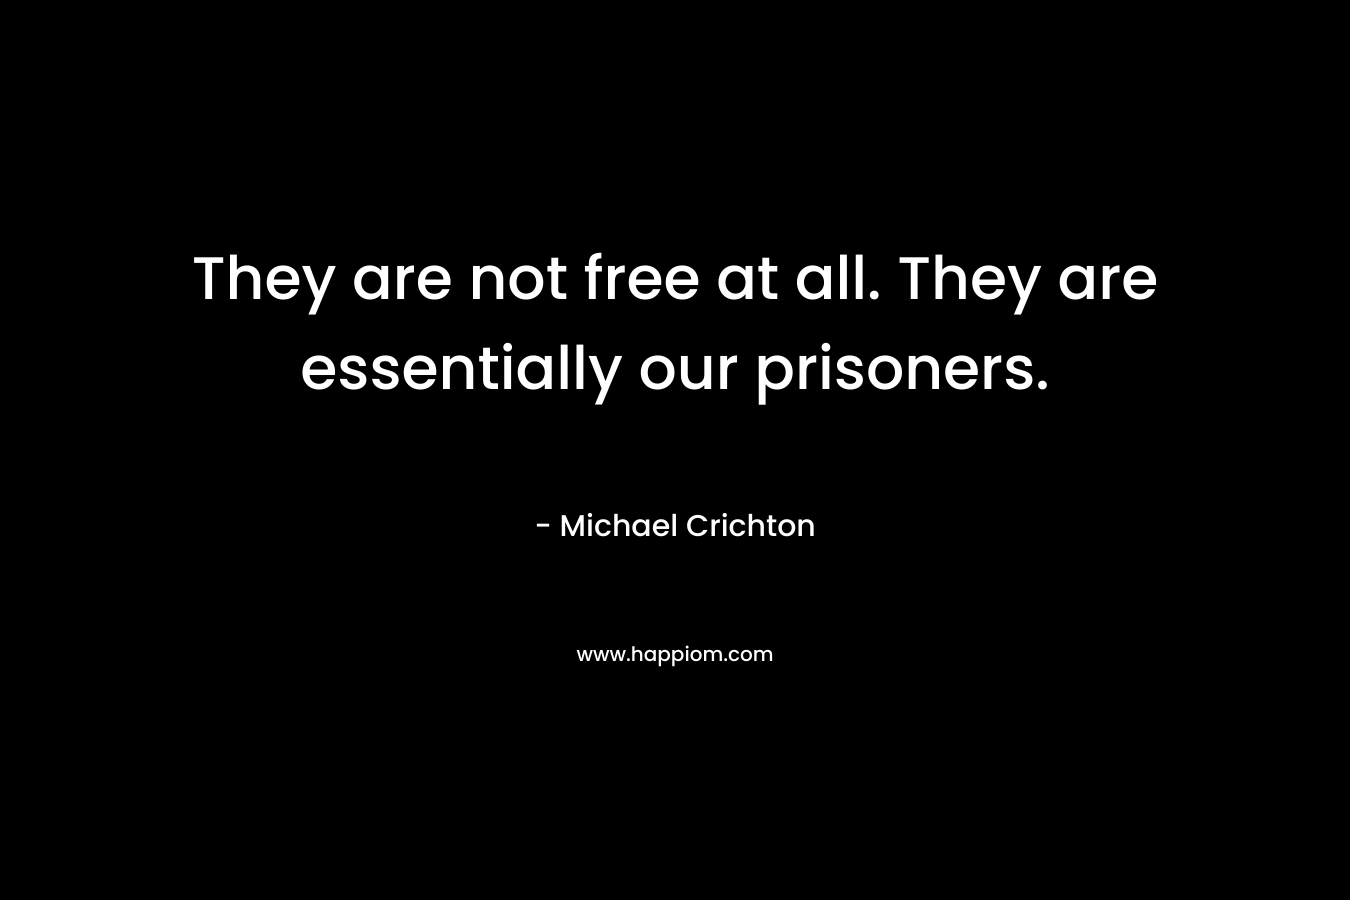 They are not free at all. They are essentially our prisoners. – Michael Crichton